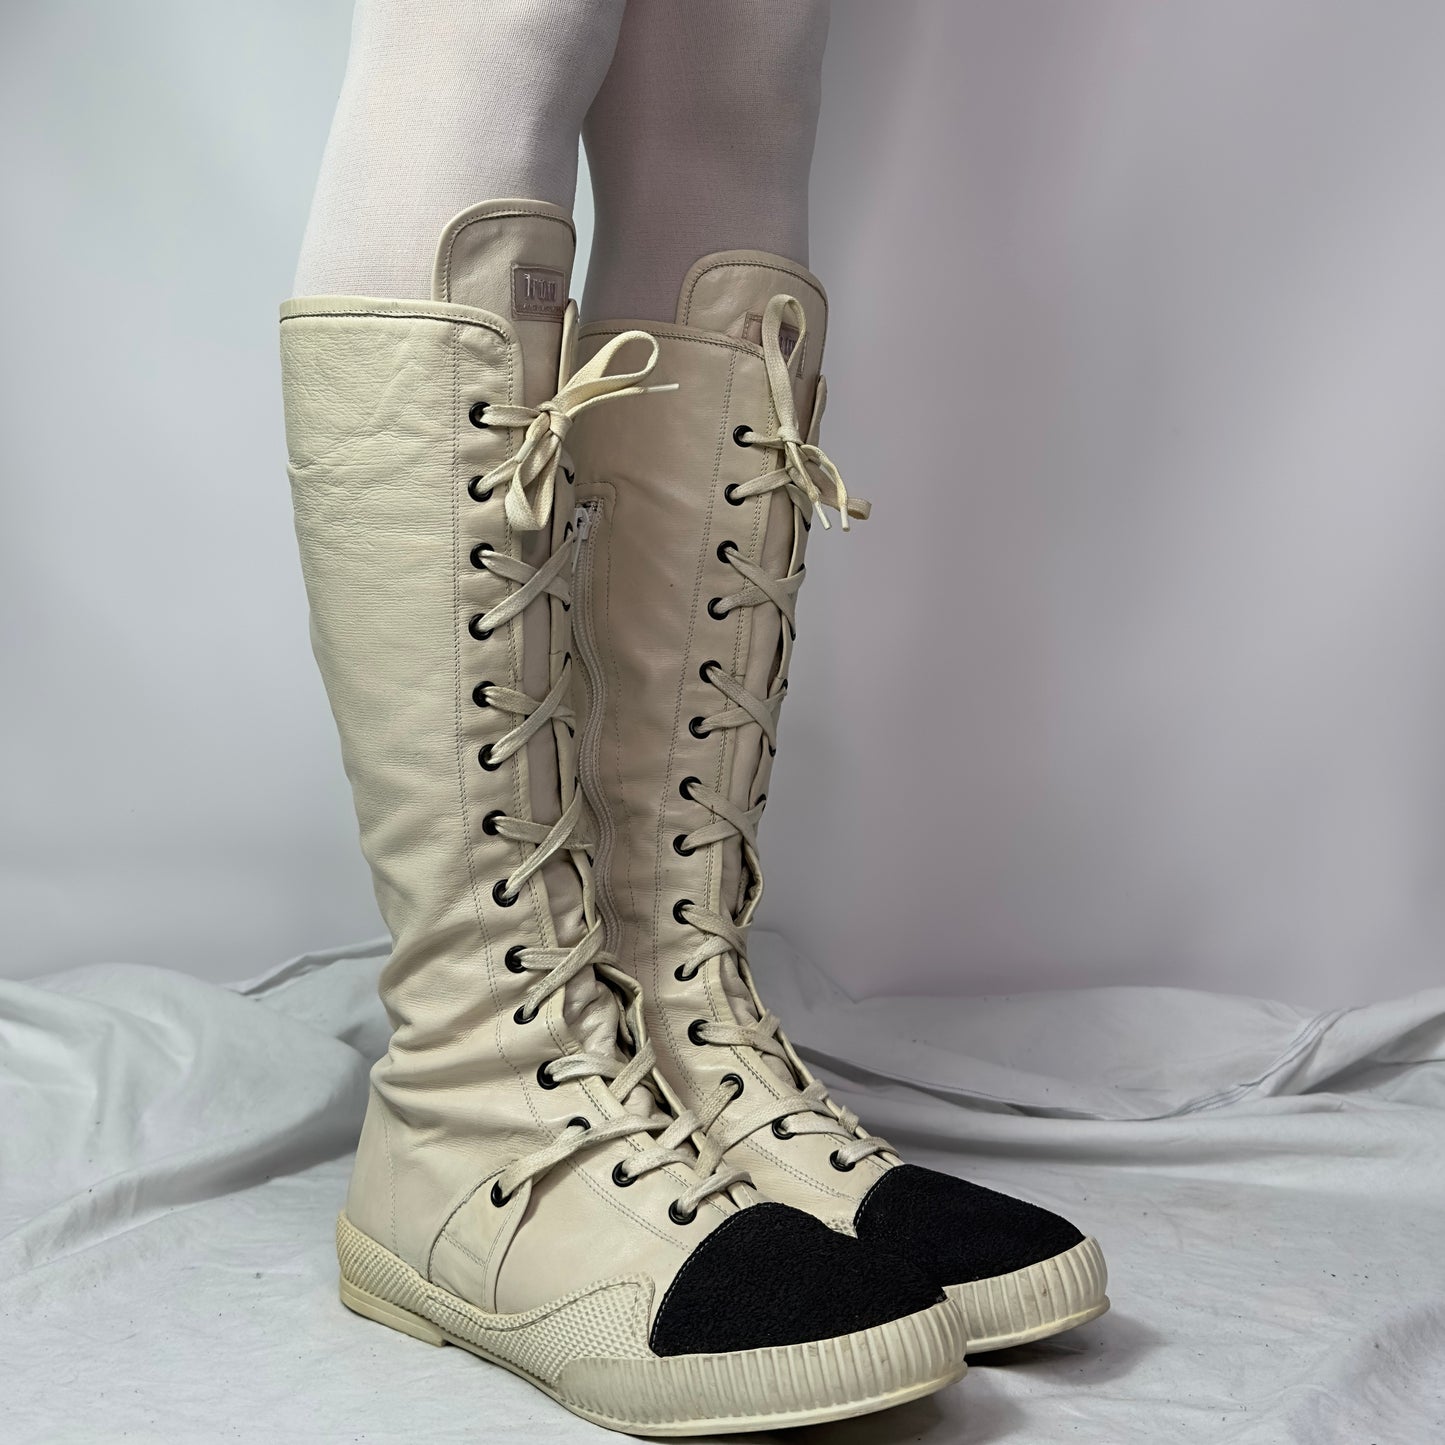 Gianni Barbato Knee High Lace Up Boxing Moto Boots